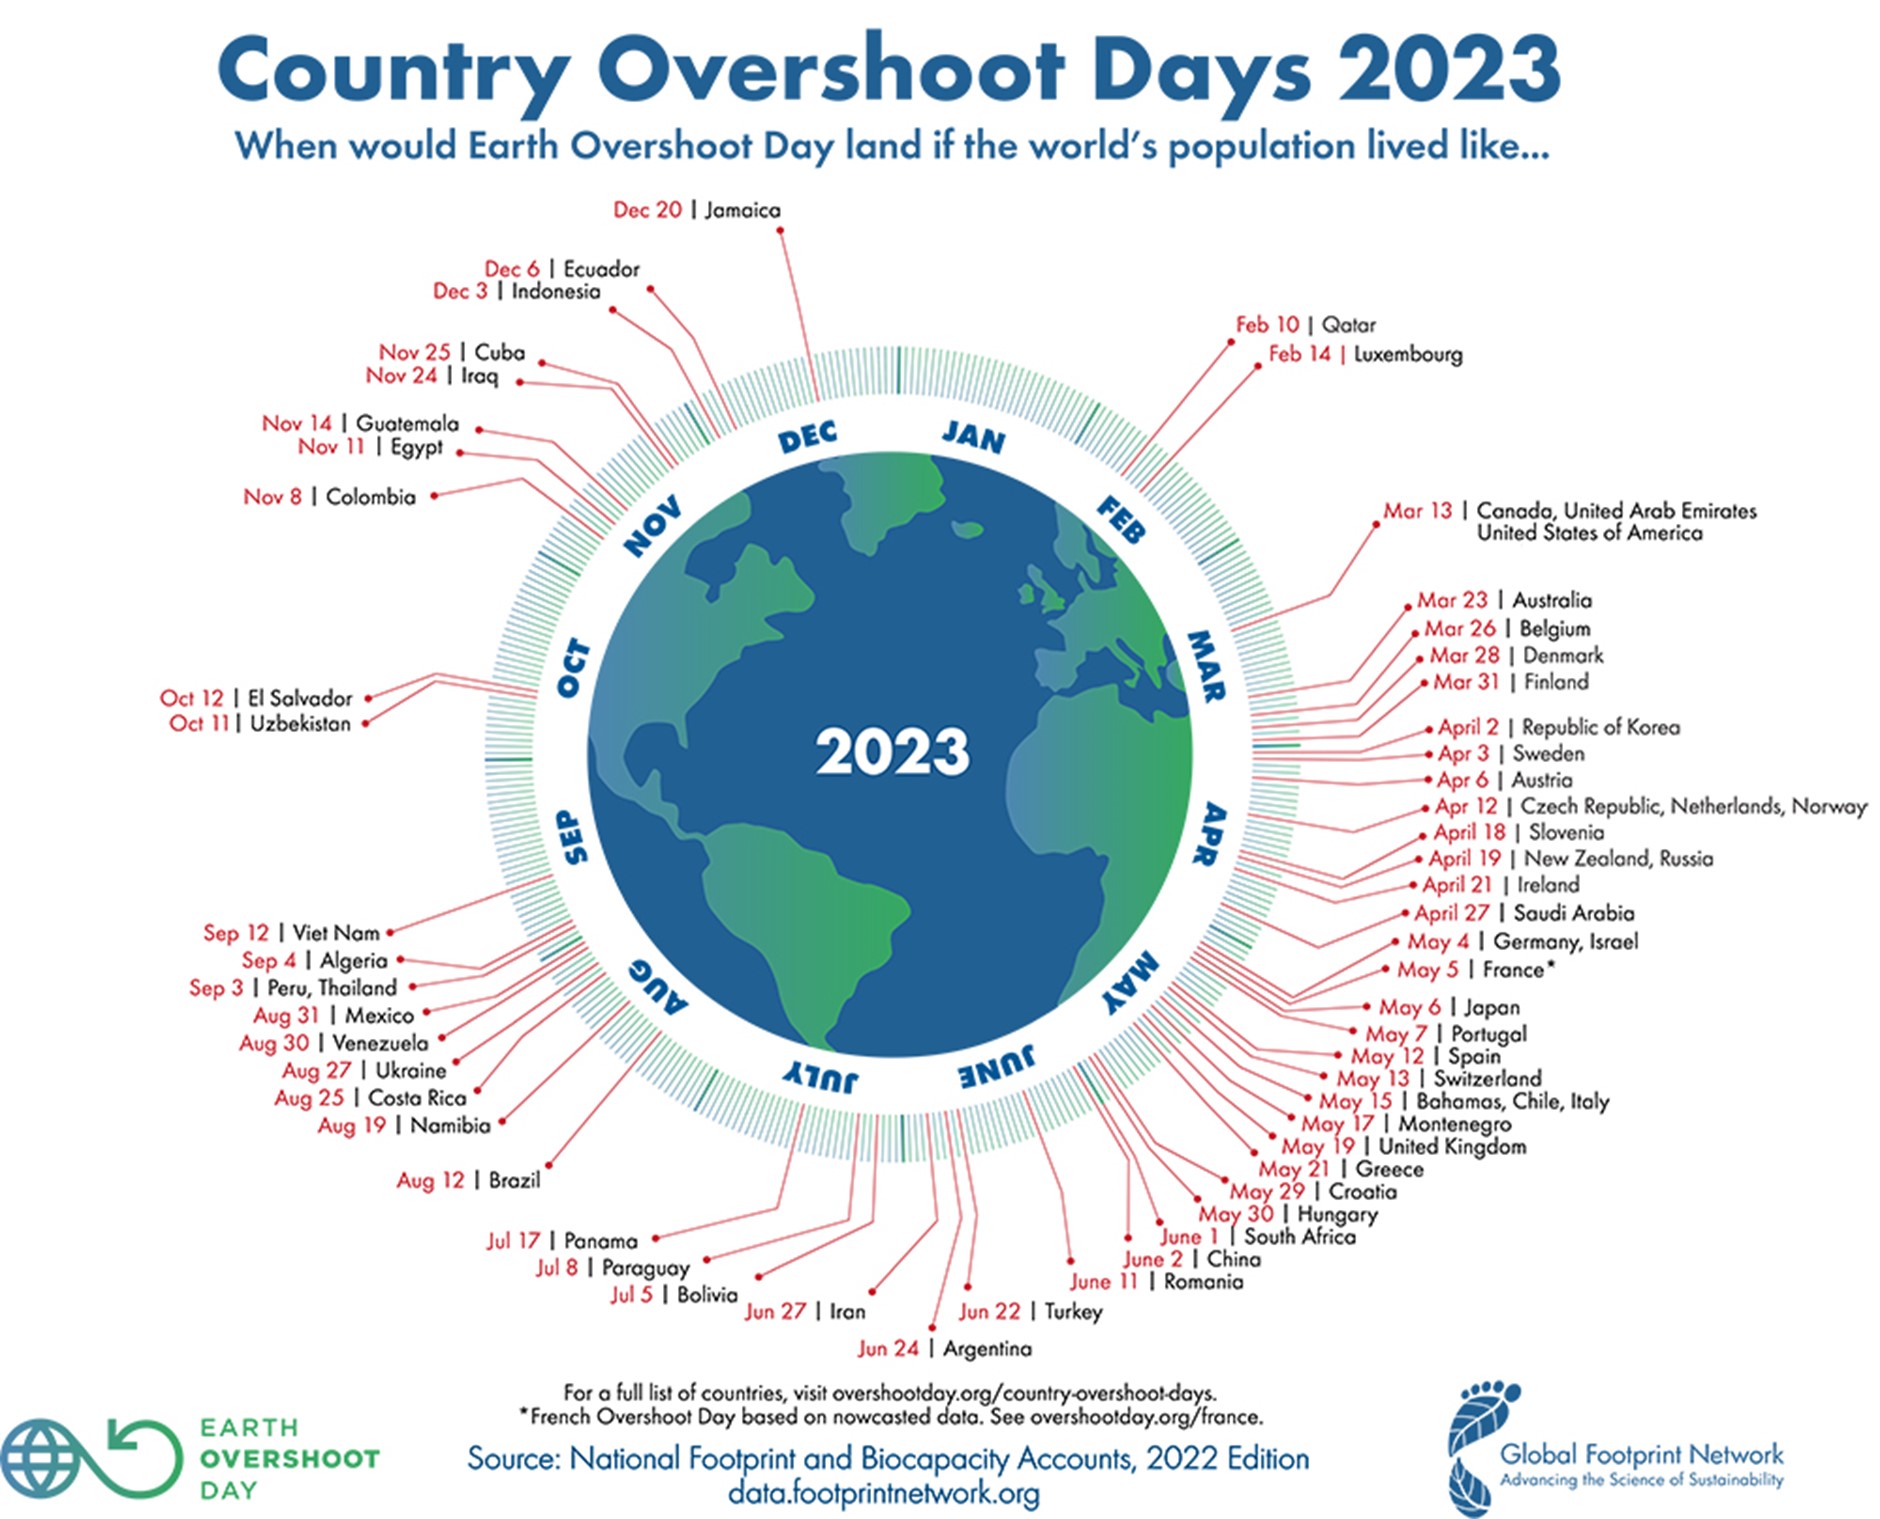 A globe showing the dates for each country's estimated Earth Overshoot Day. For a full list of the countries and dates in the image, click "Image Details"